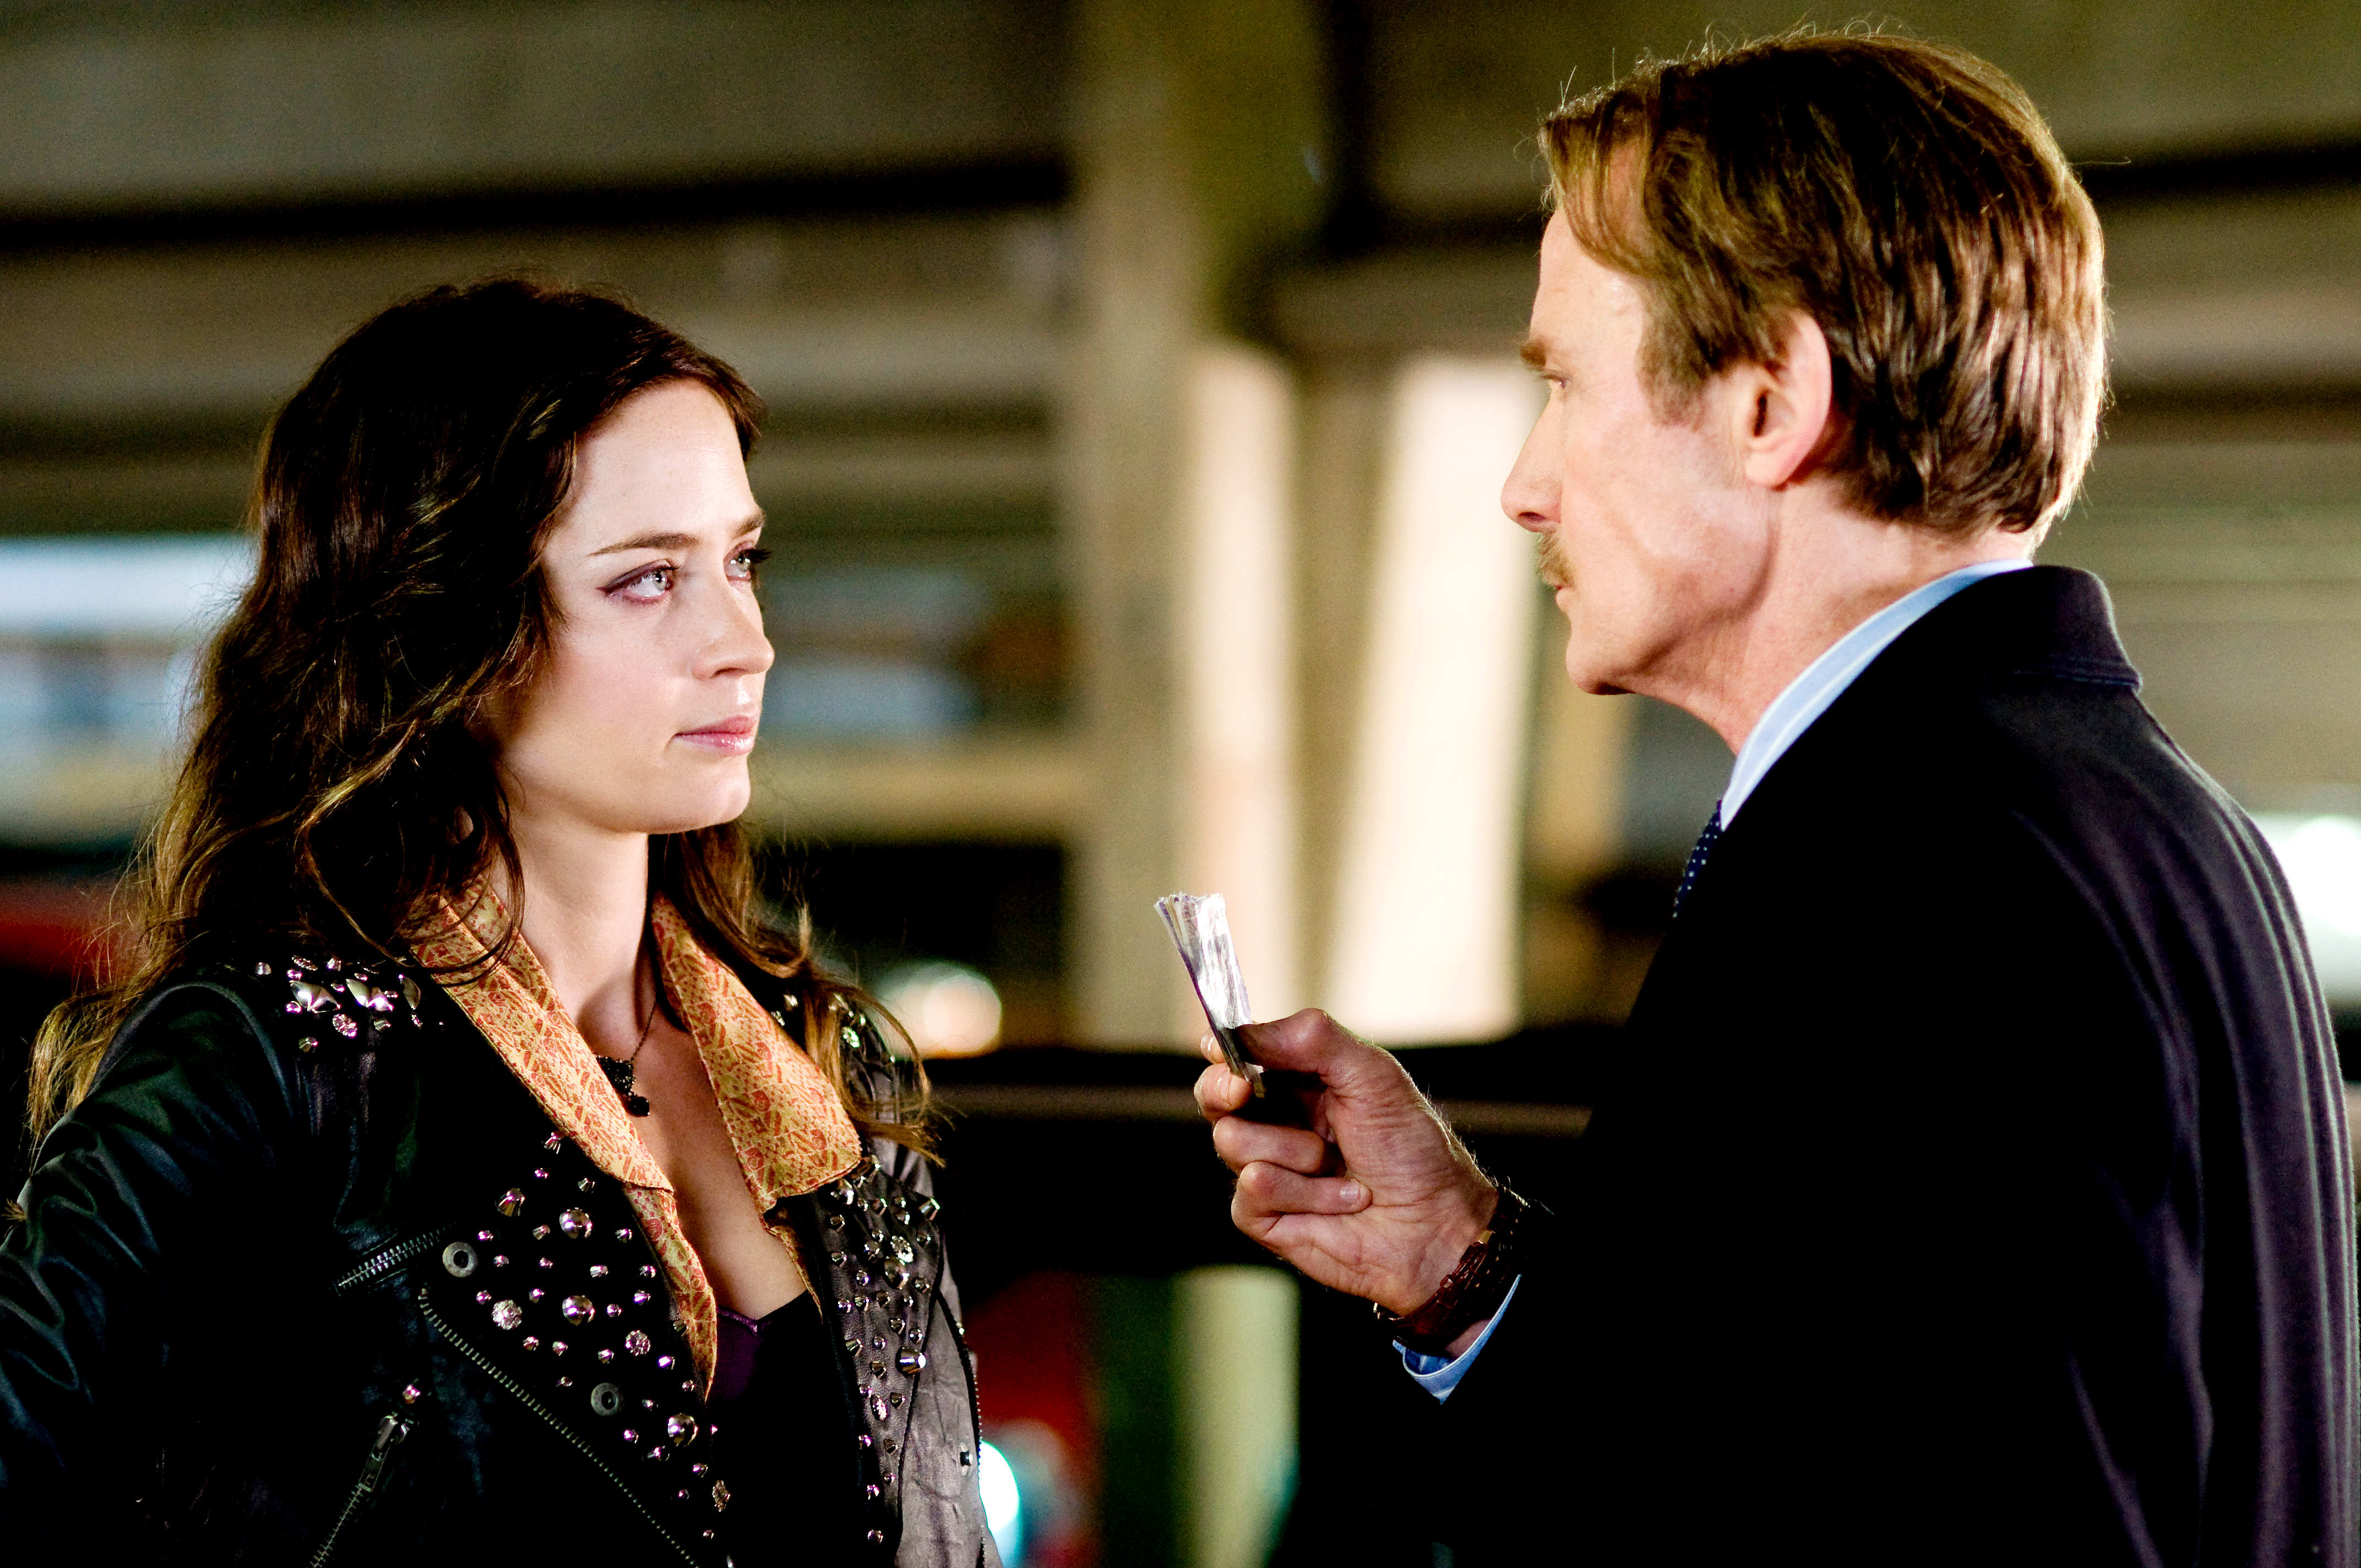 Emily Blunt stars as Rose and Bill Nighy stars as Victor Maynard in Freestyle Releasing's Wild Target (2010)